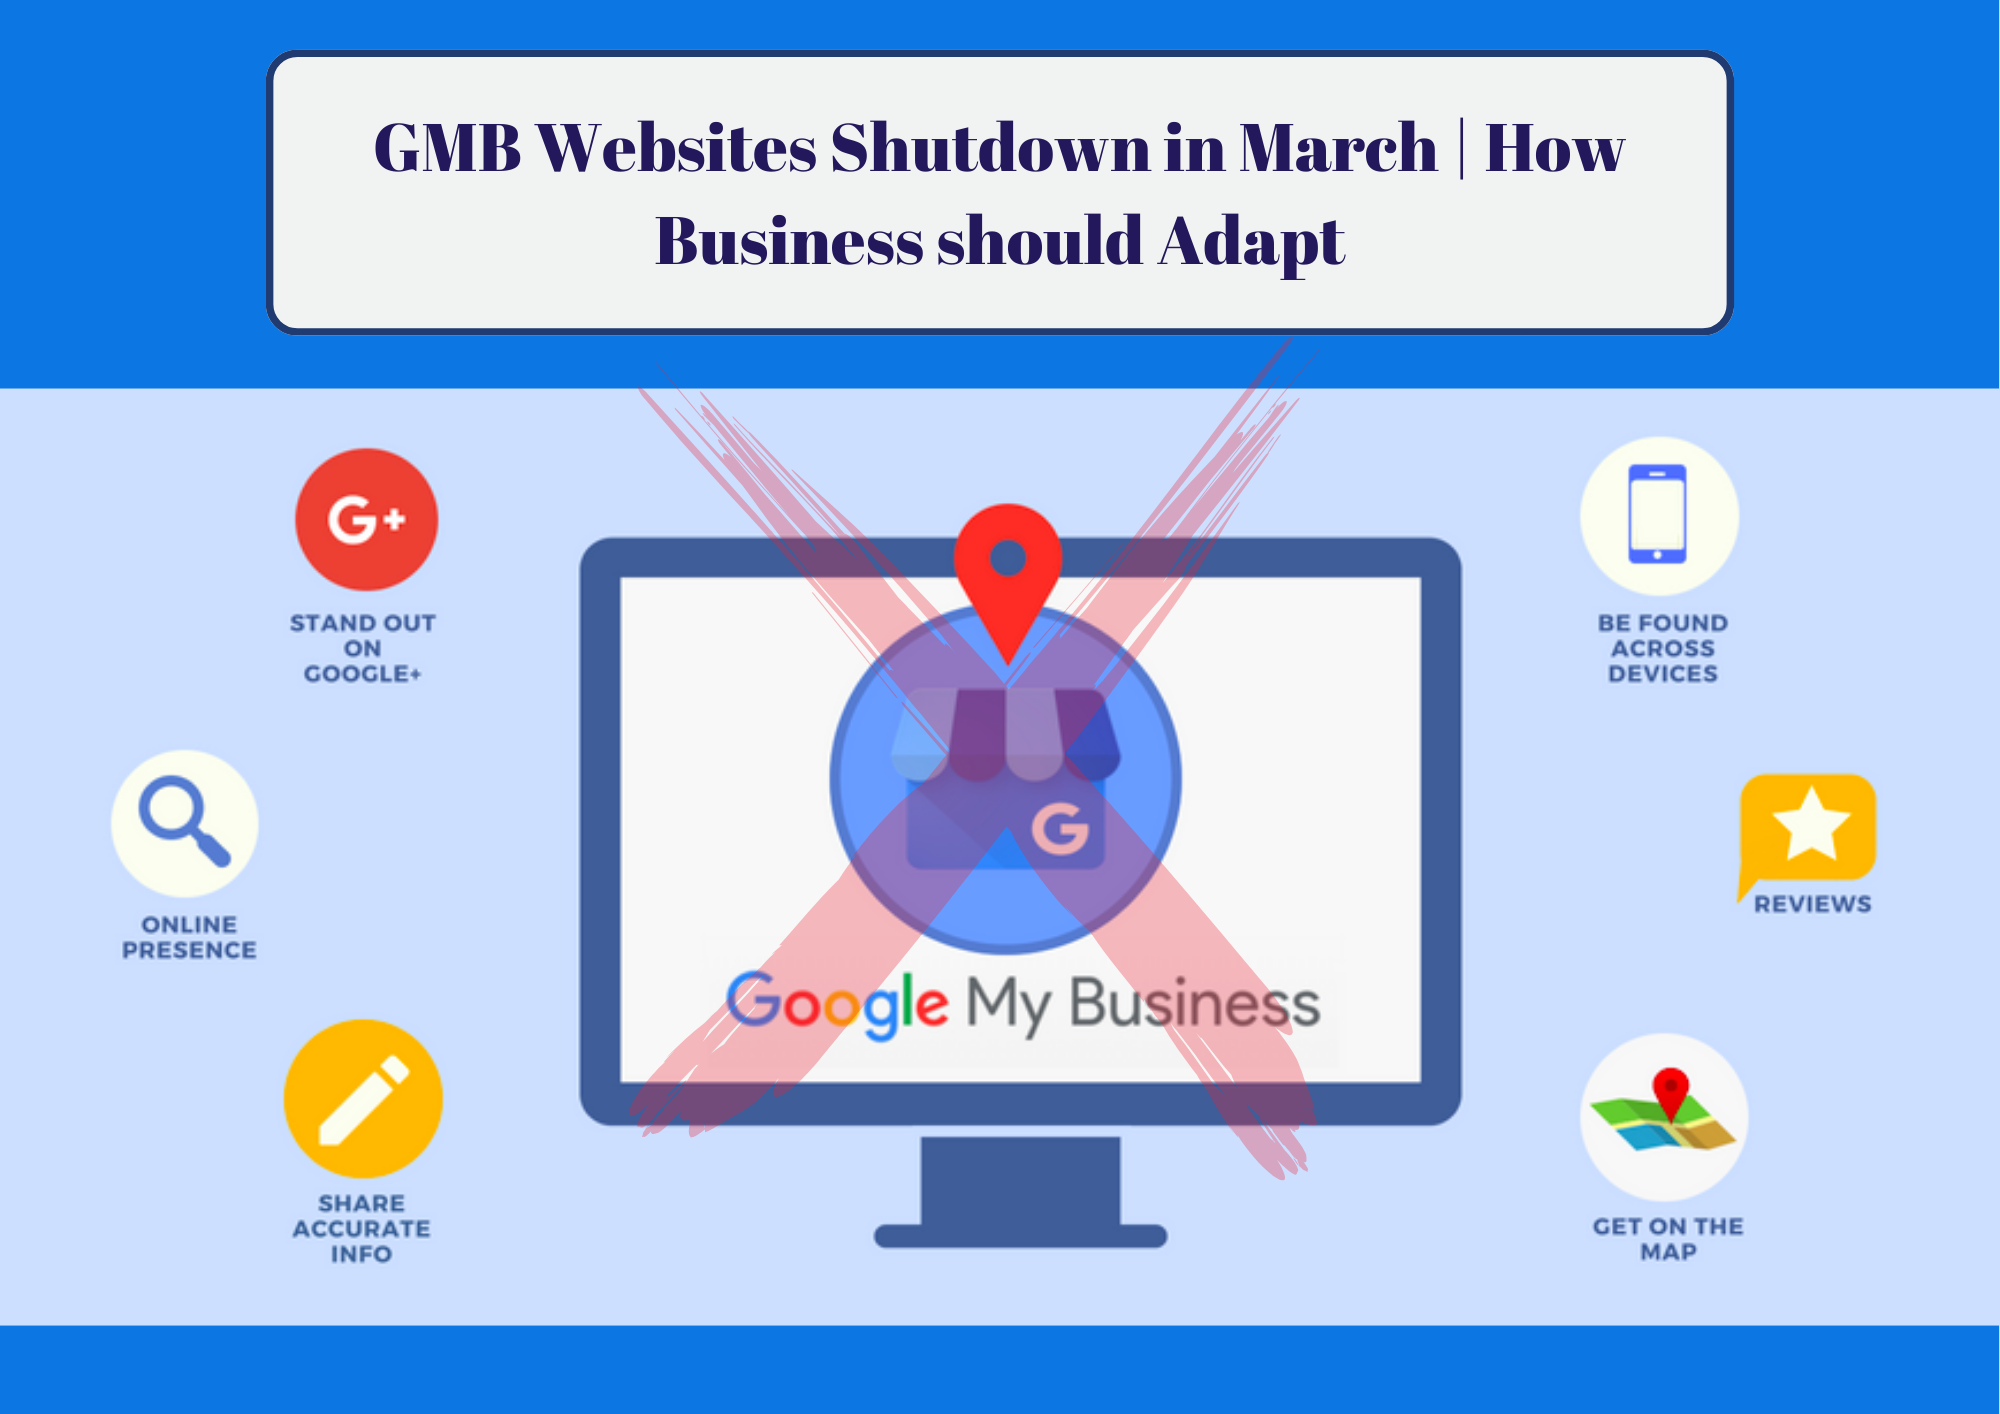 GMB Websites Shutdown in March How Business should Adapt